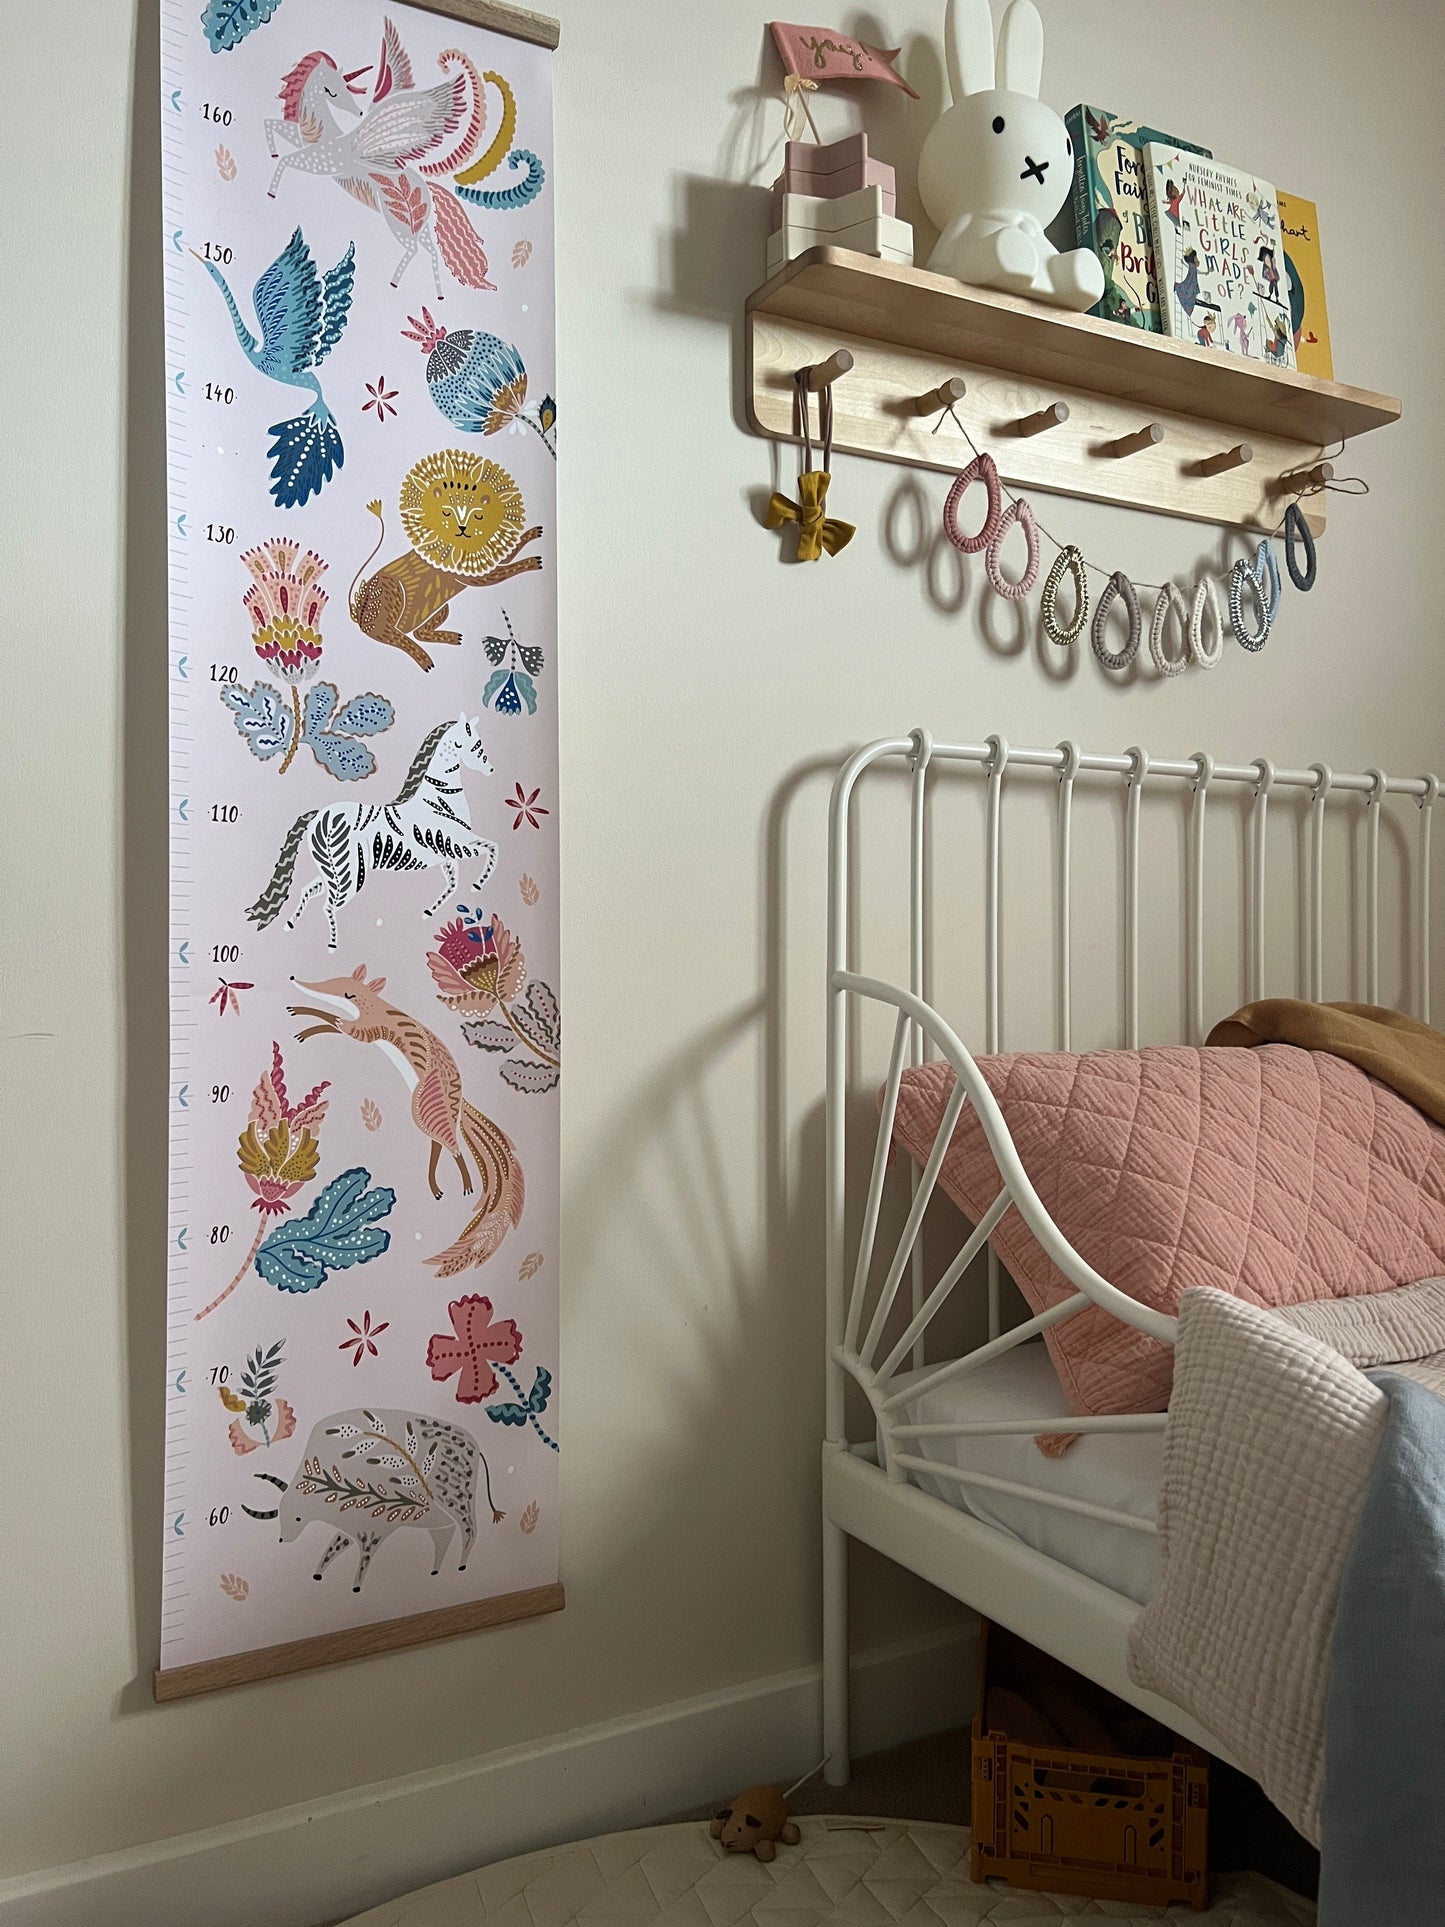 Our folk carnival height chart hanging on a neutral wall. Vintage metal framed bed in the background and a wooden shelf with peg hooks with a miffy lamp on it and raindrop bunting.